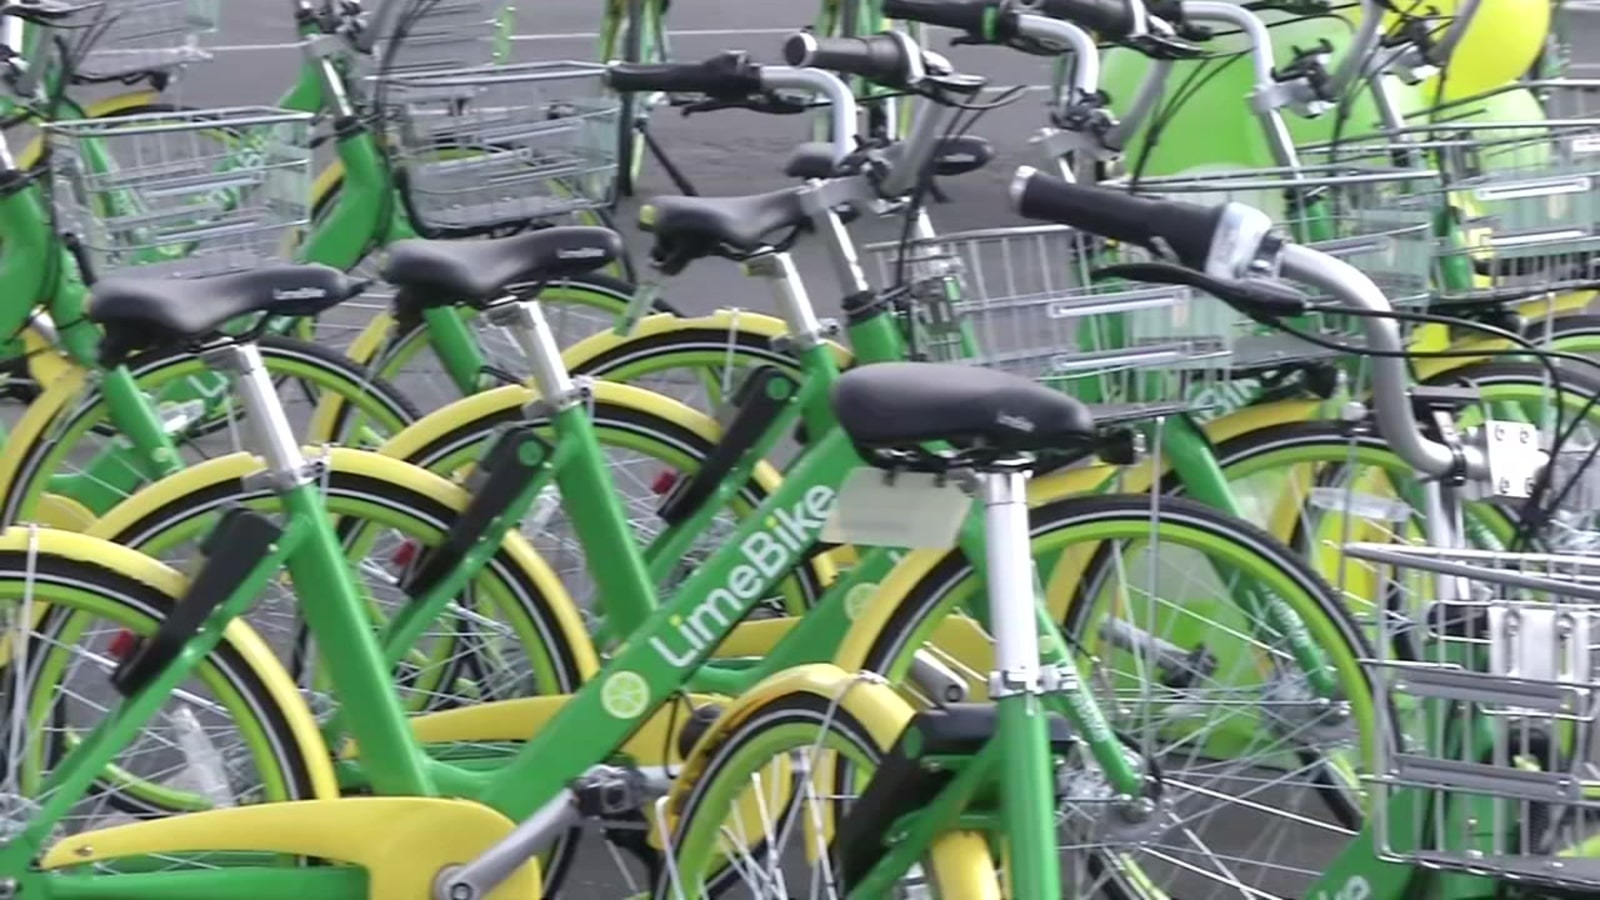 Lime Bikes 3 - Arson In Ithaca: Police Seek Witnesses After Four Lime Bikes Set On Fire